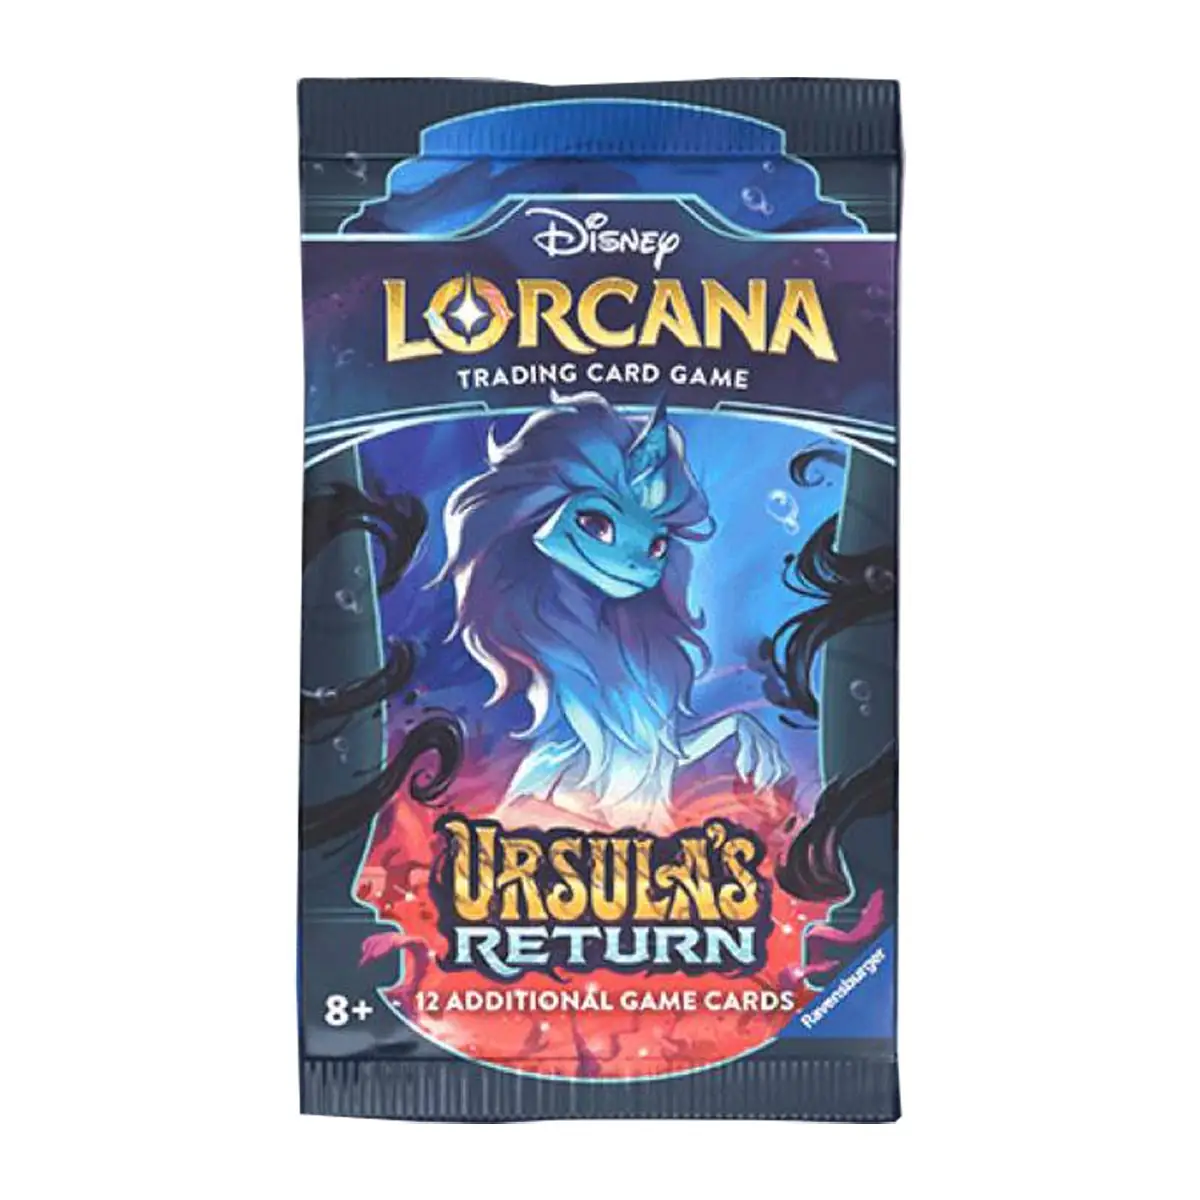 Disney Lorcana Trading Card Game Set 4 - Ursula's Return - Booster Pack - Loaded Dice